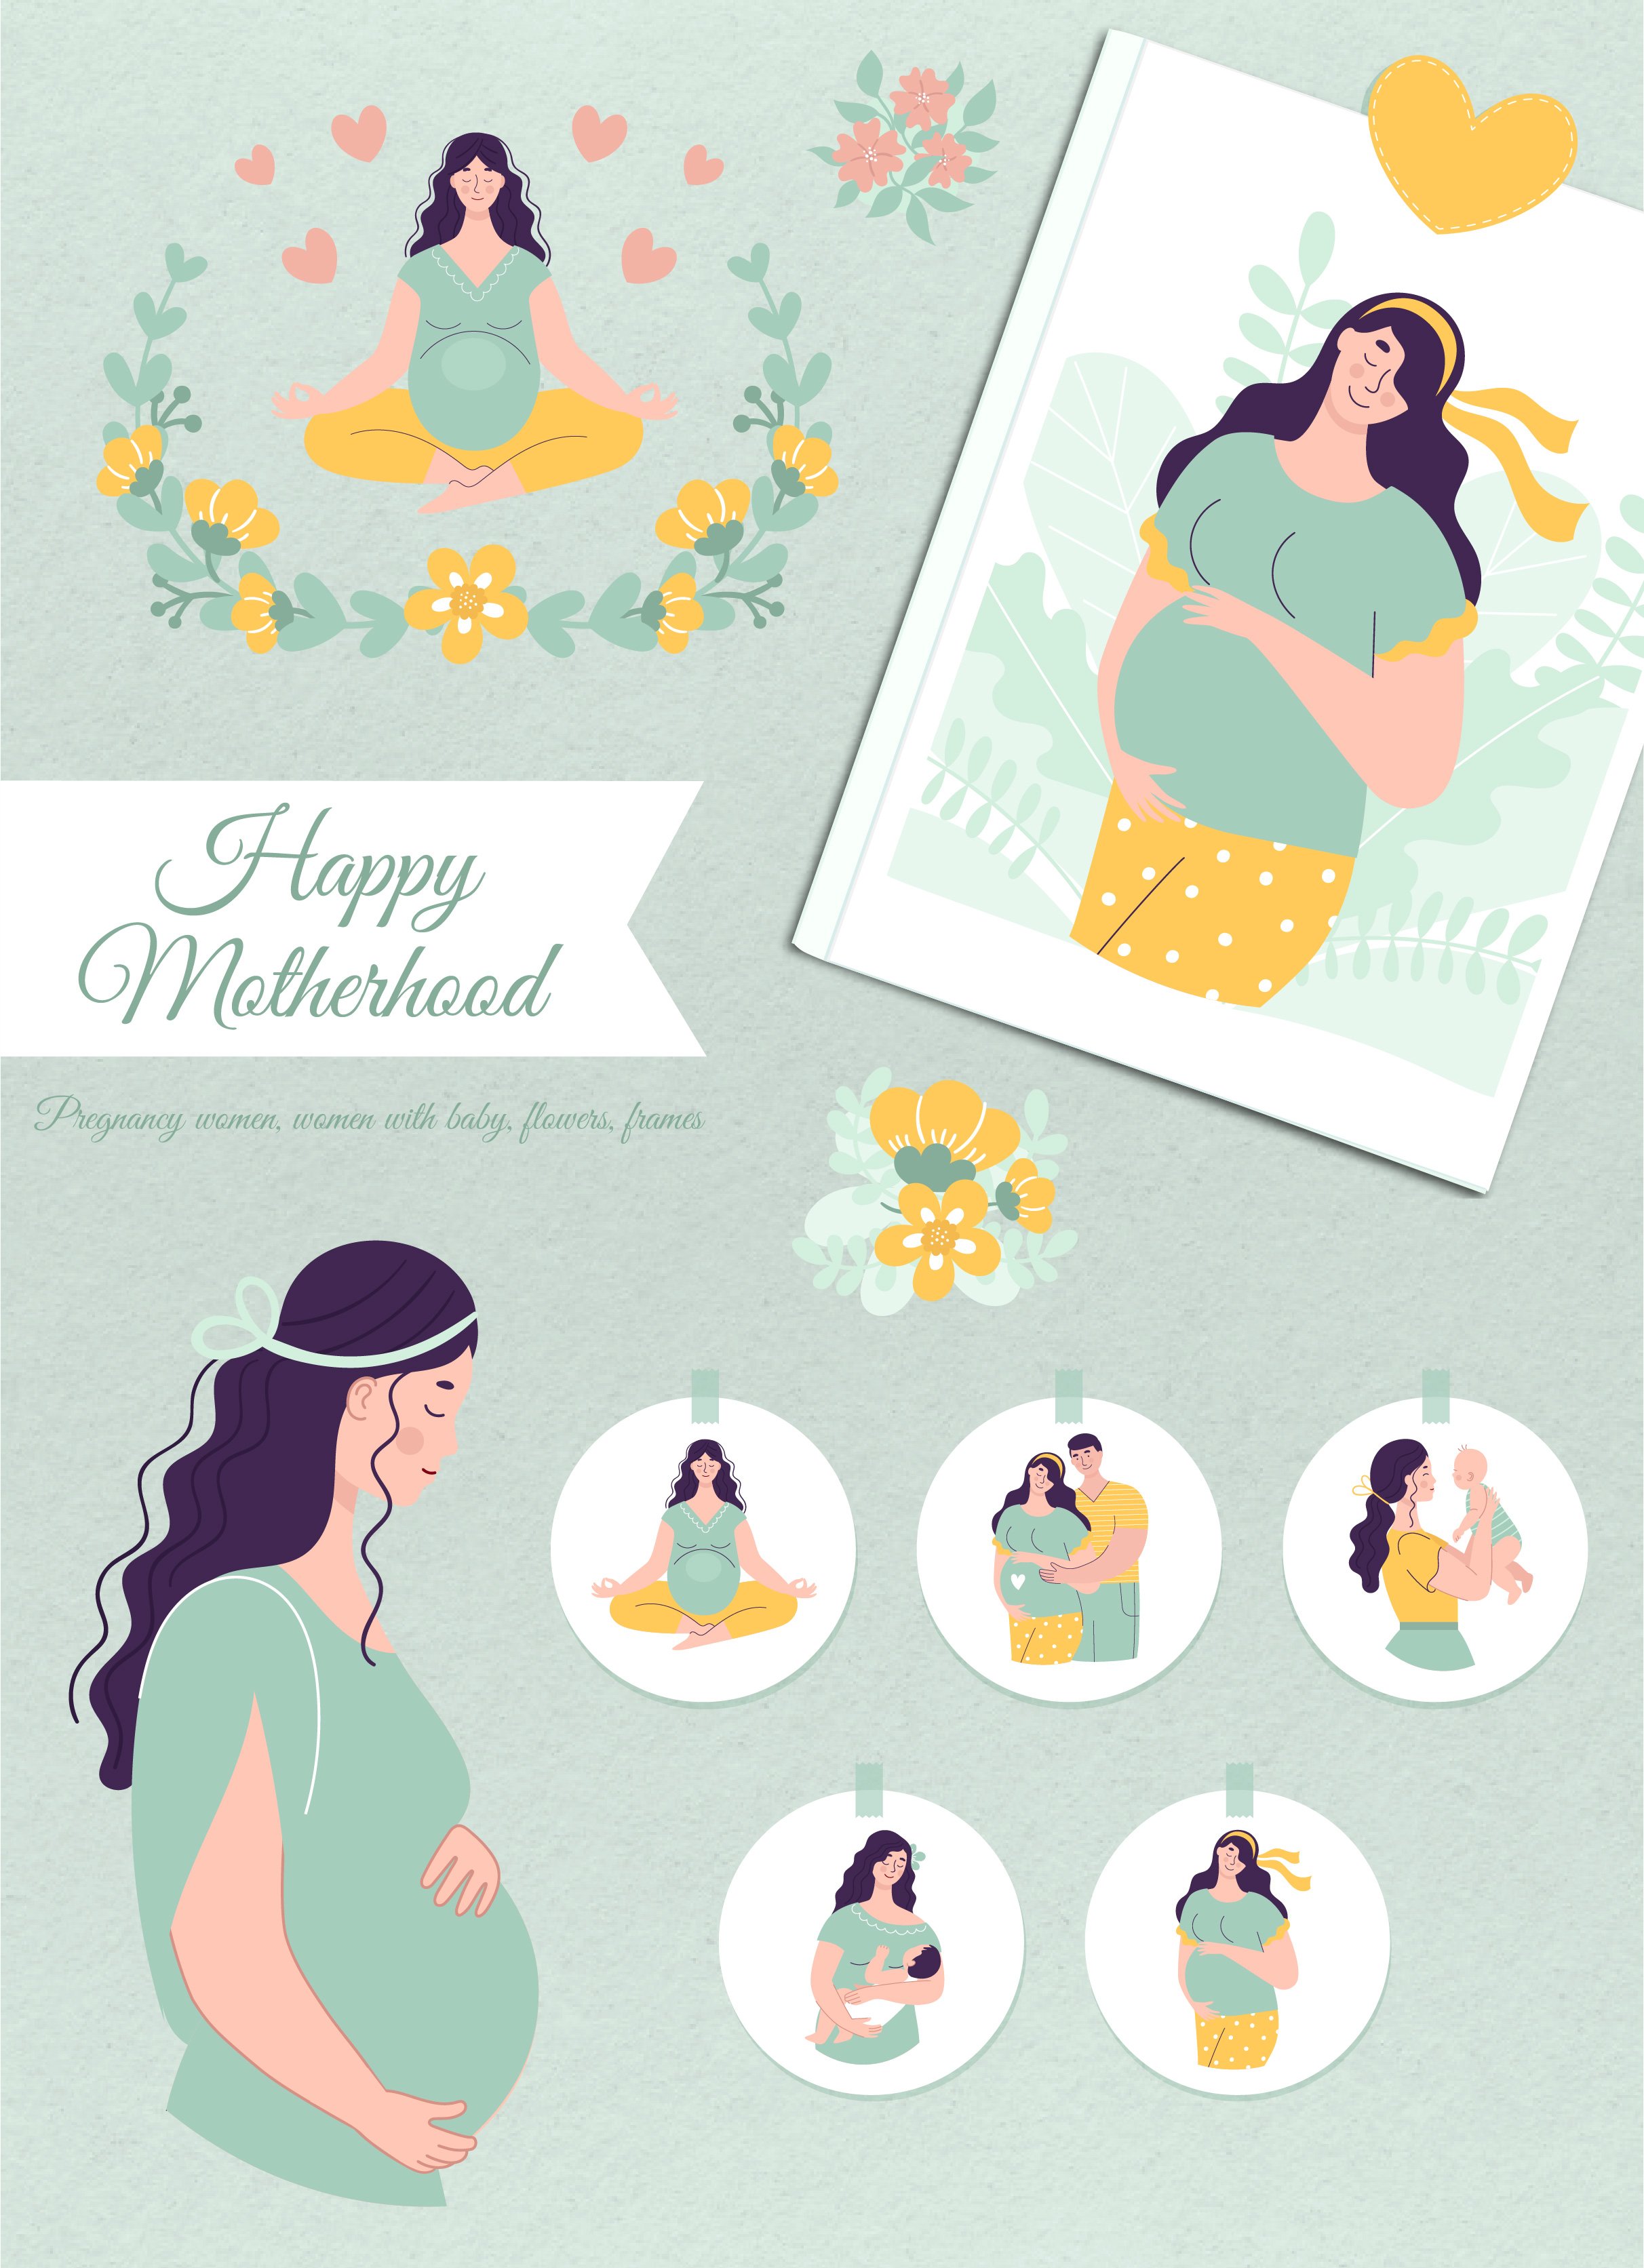 Happy pregnancy and motherhood cover image.